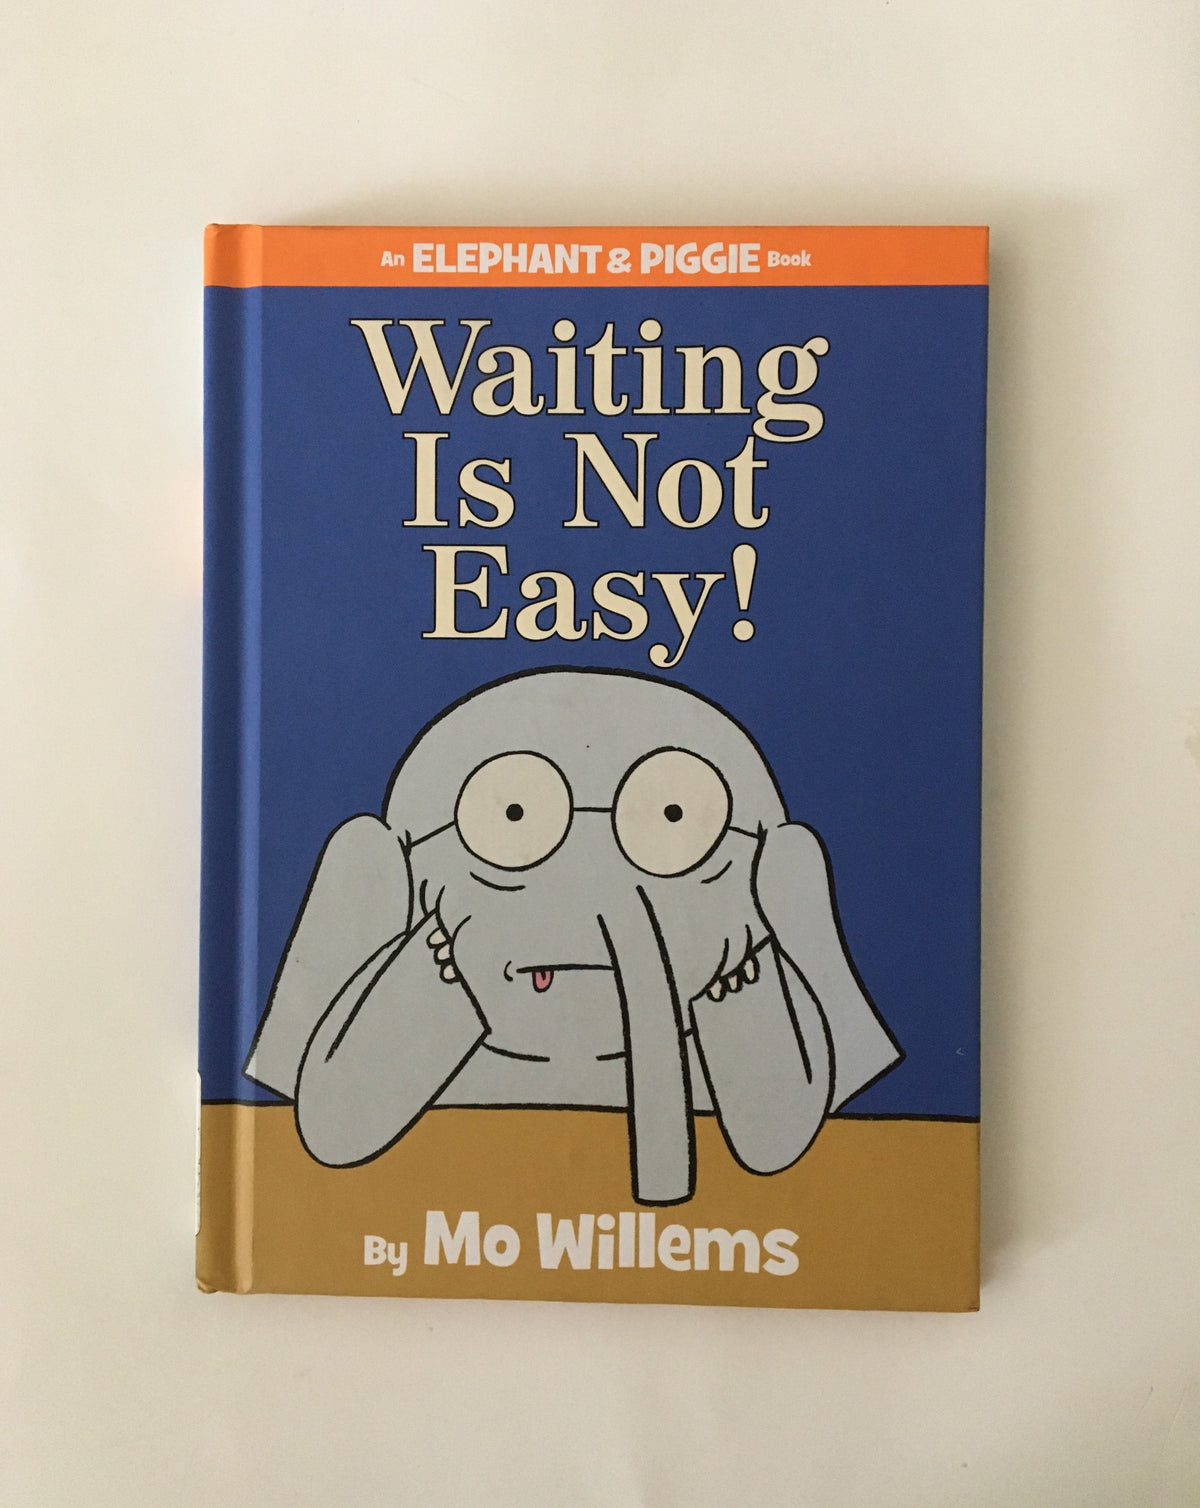 Waiting is Not Easy! by Mo Willems